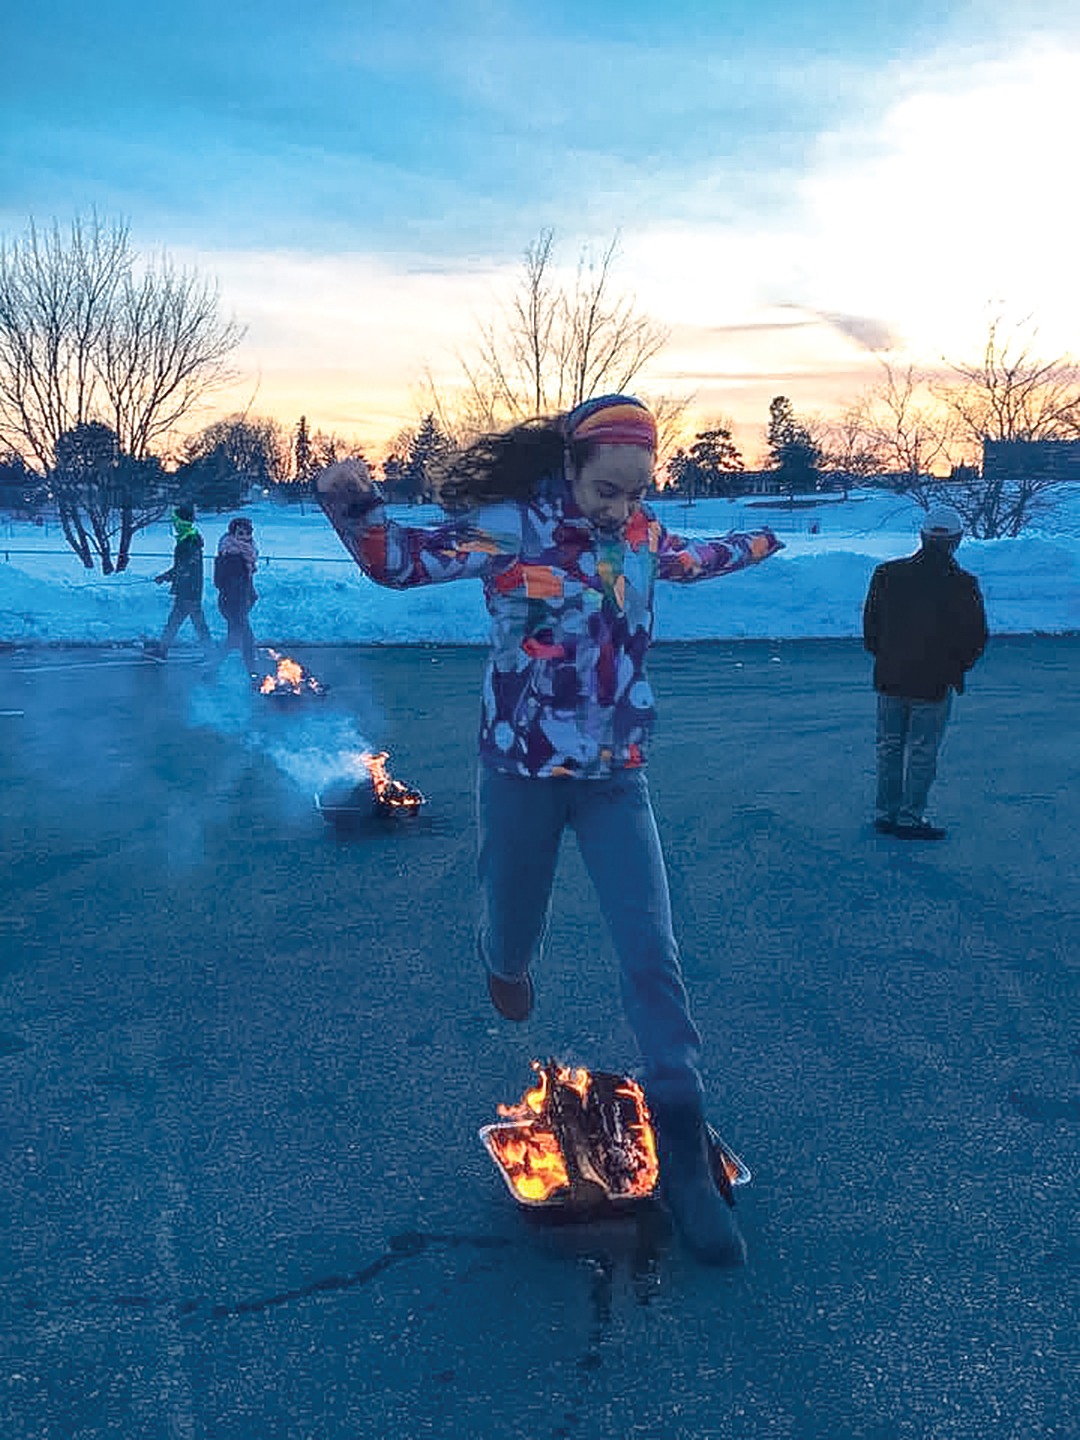 Community members jump over the fire at the first Chaharshanbeh Suri event in 2018. Photo: Ghazaleh Dadres